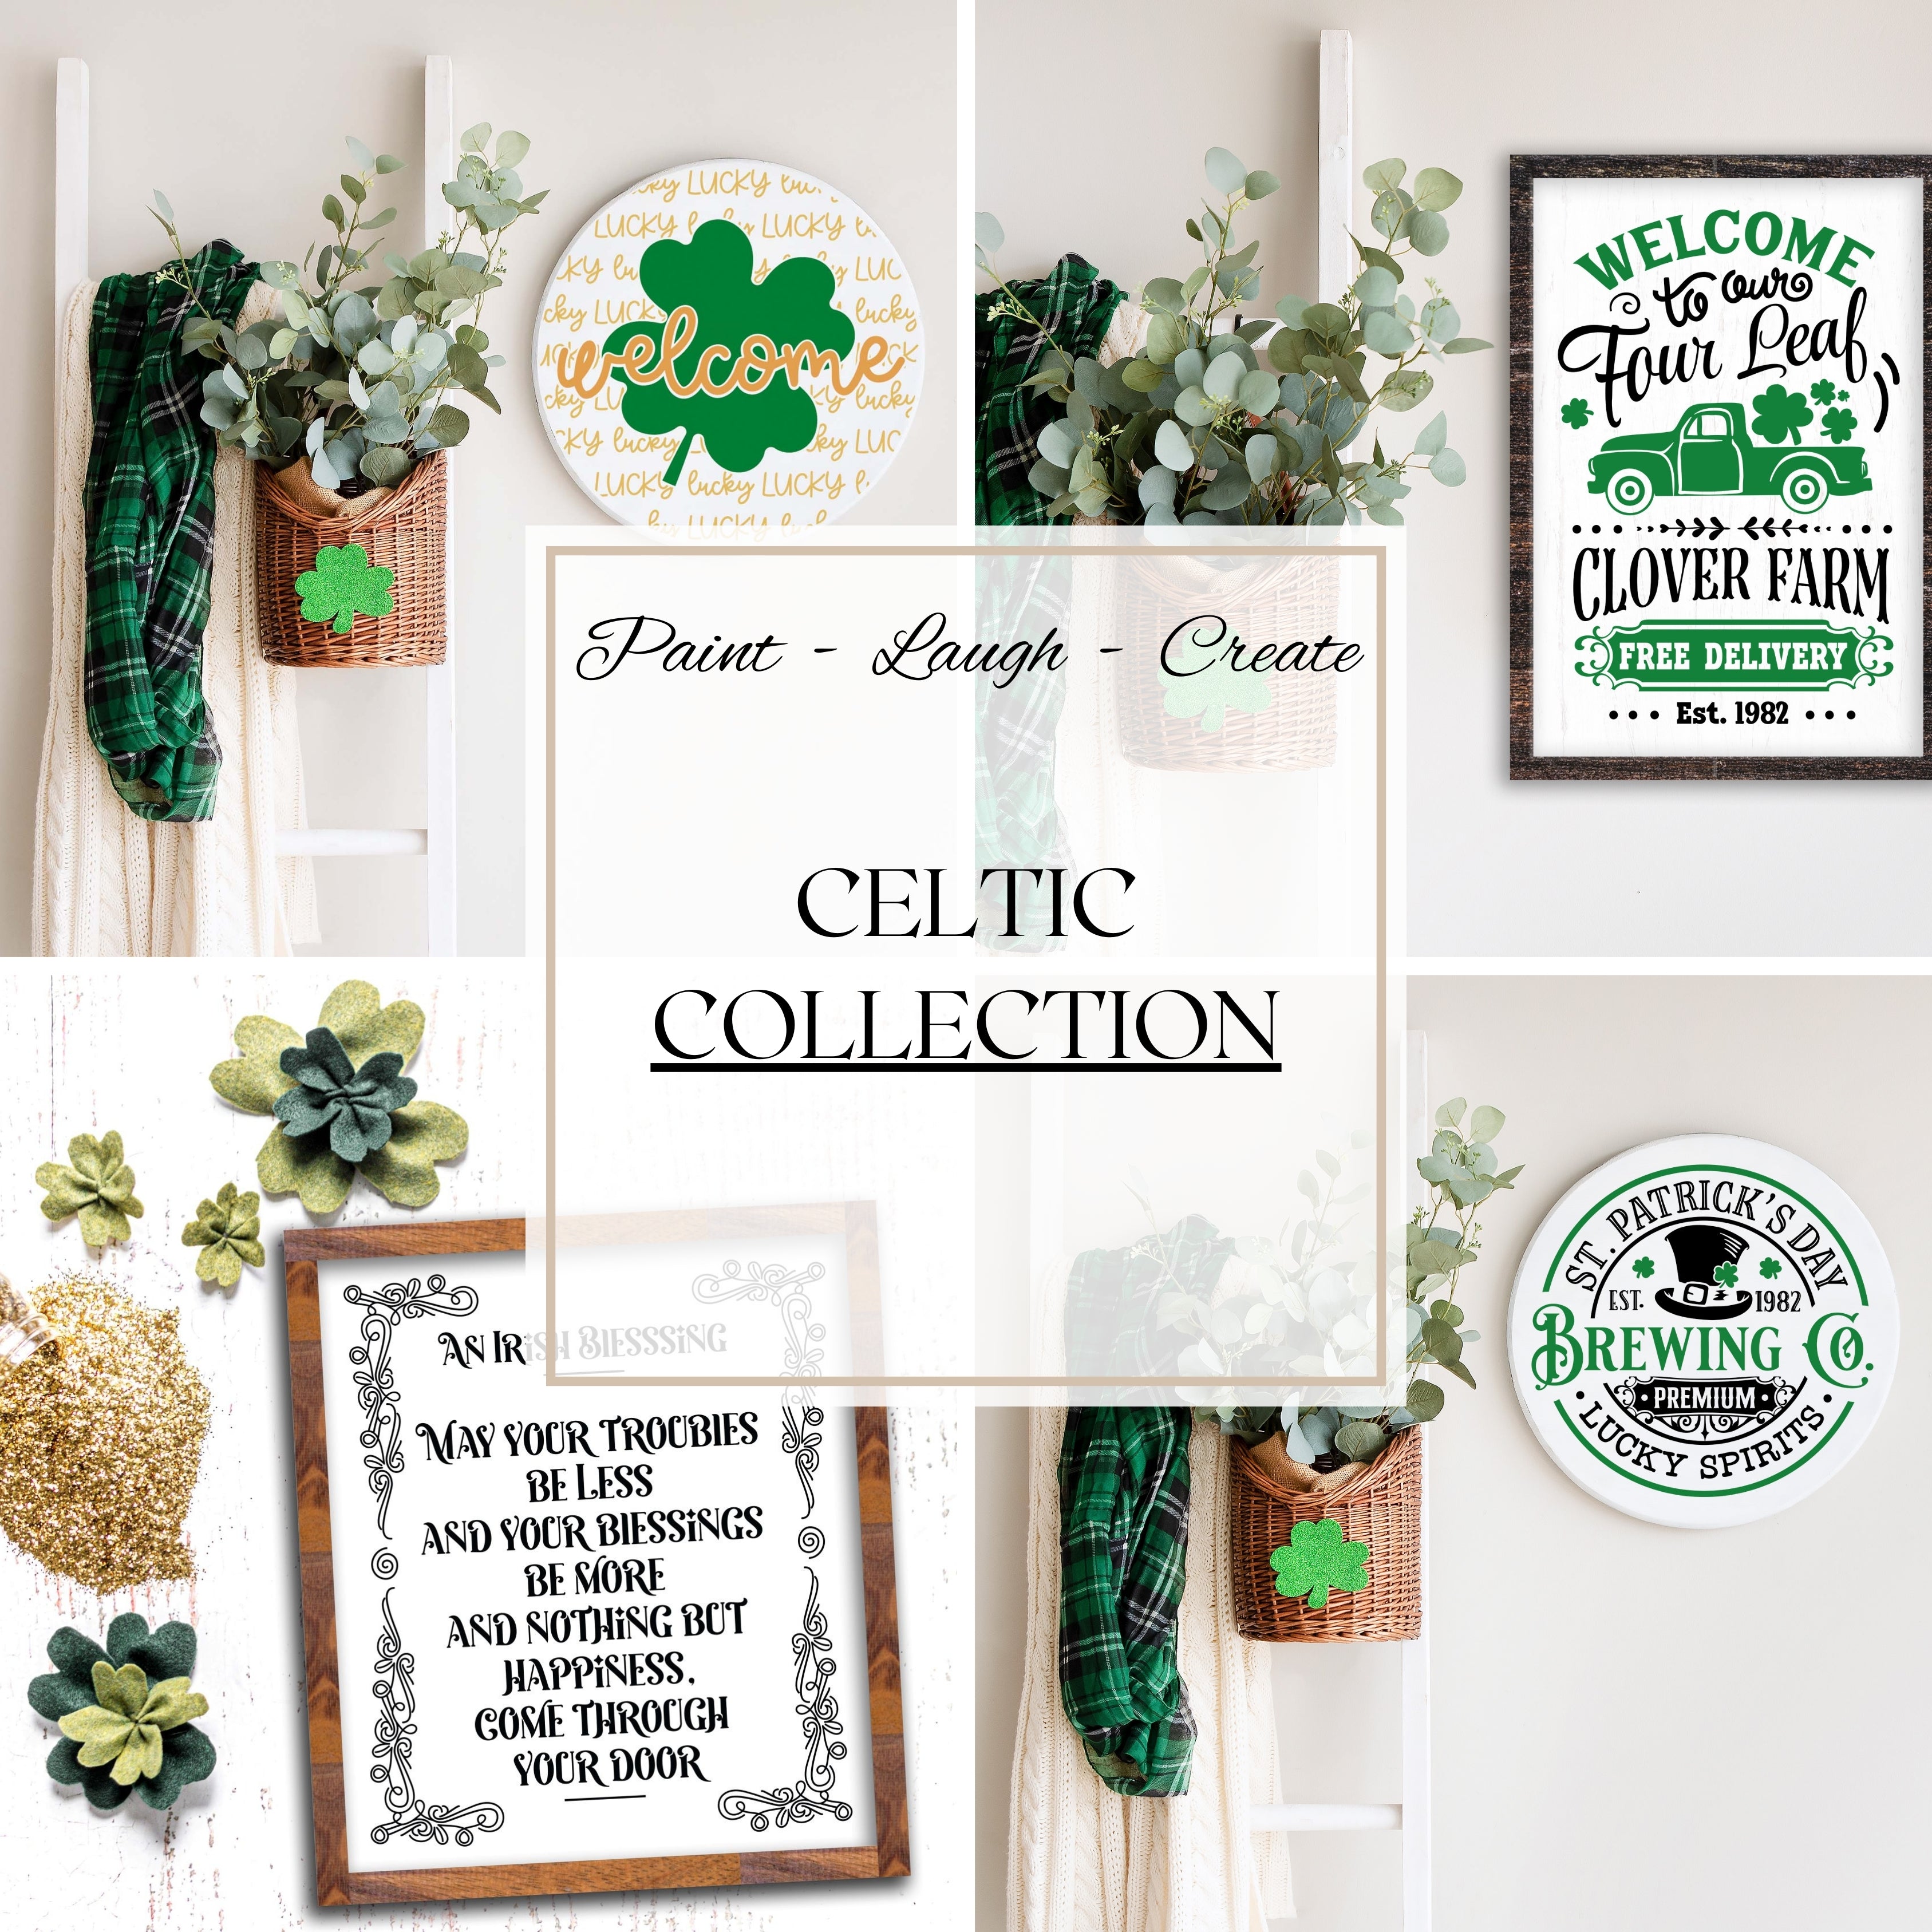 THE CELTIC COLLECTION